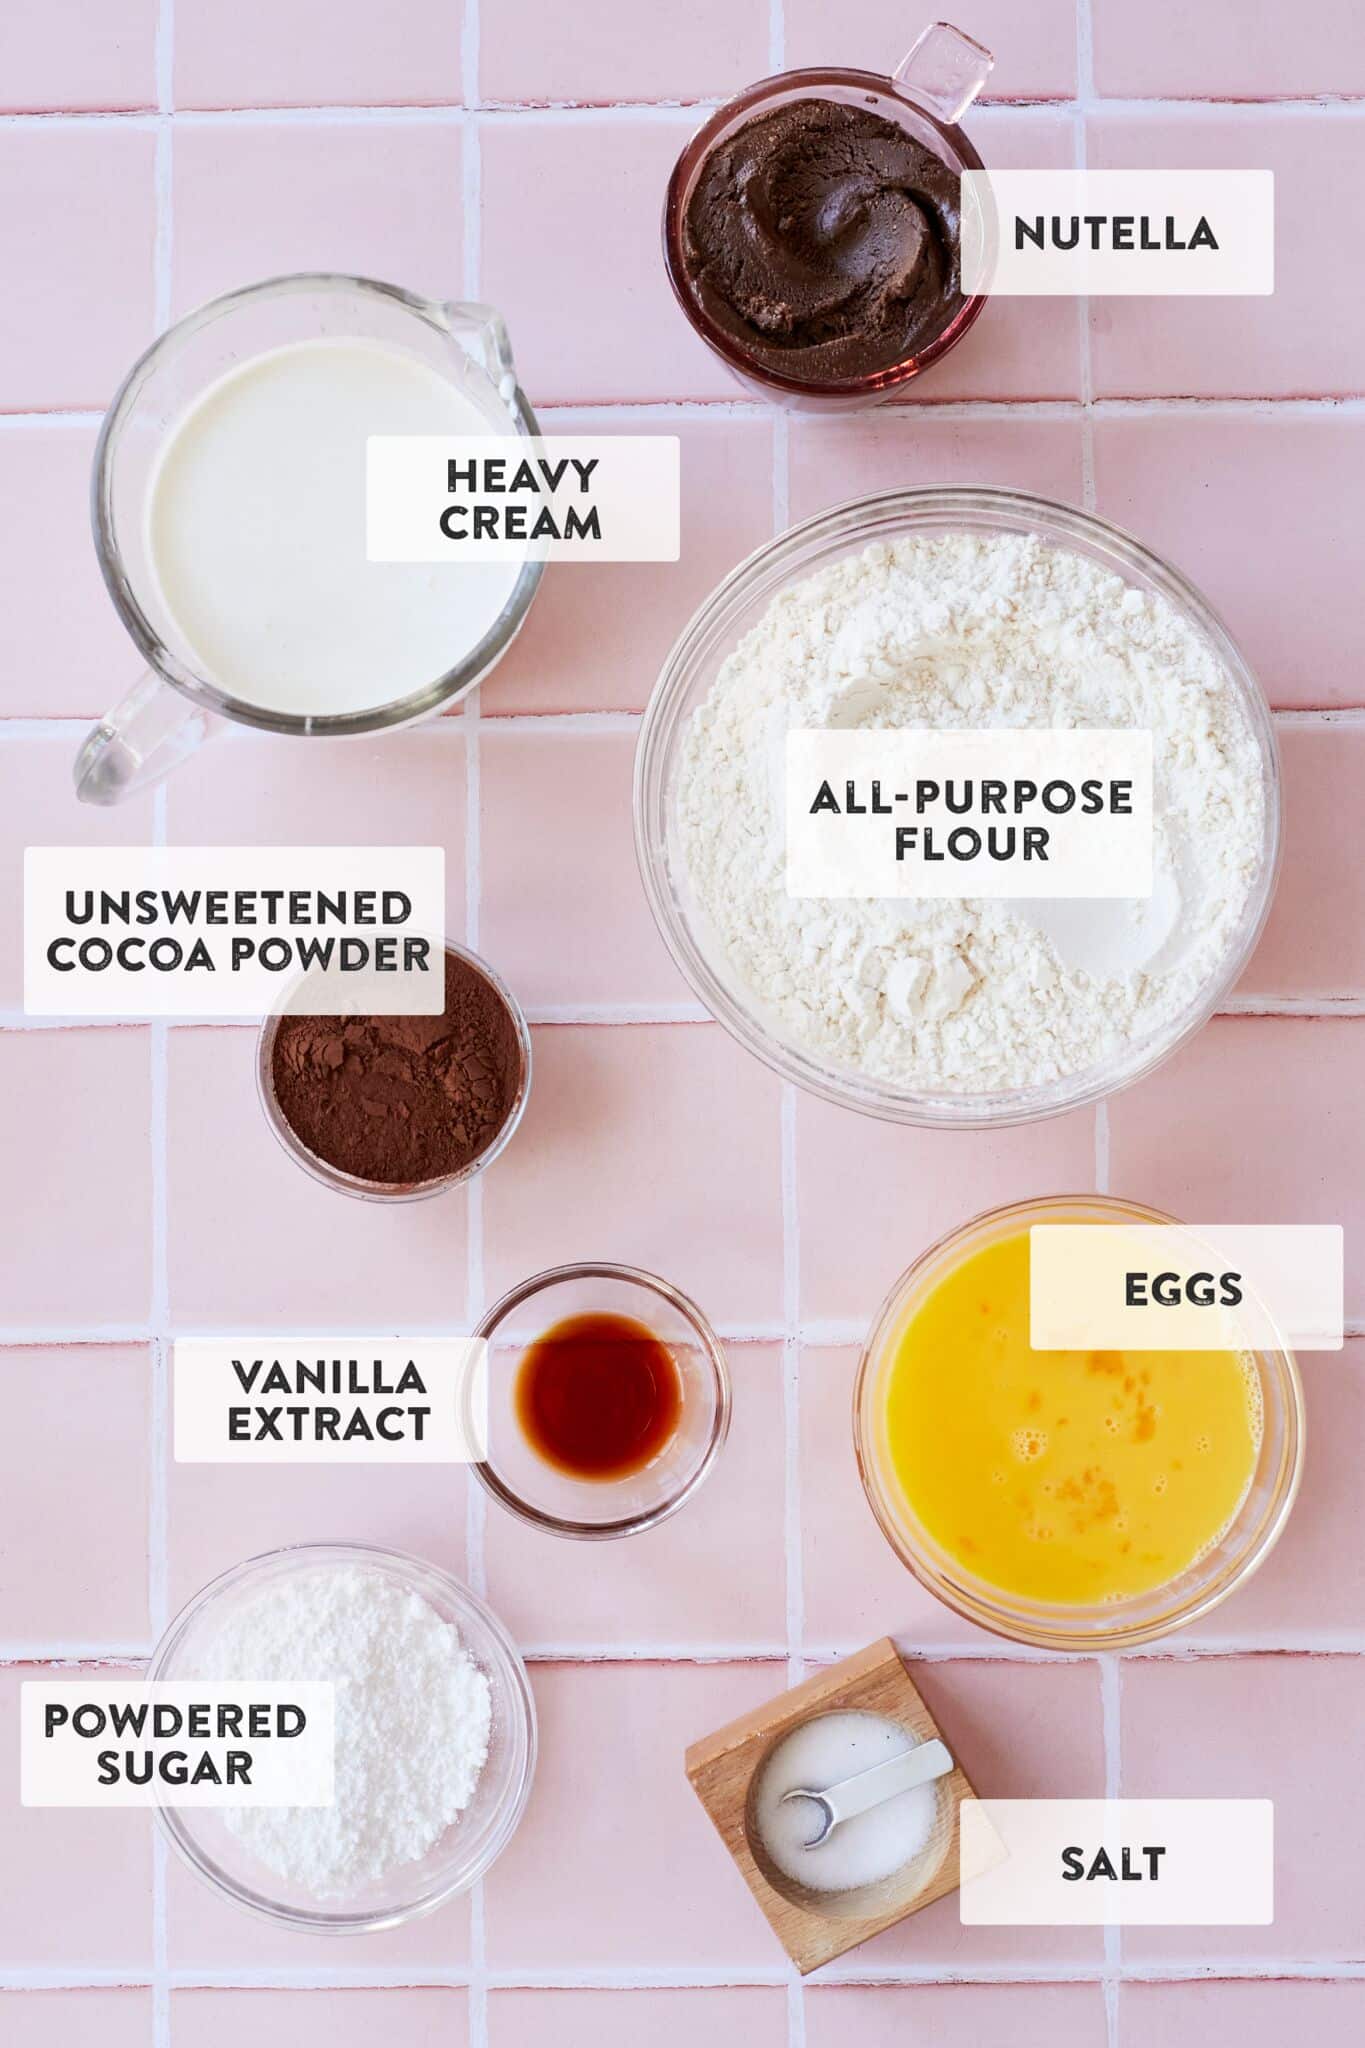 All of the ingredients laid out in preparation bowls: heavy cream, all-purpose flour, cocoa powder, salt, eggs, vanilla extract, powdered sugar, and Nutella, on a pink counter top. 